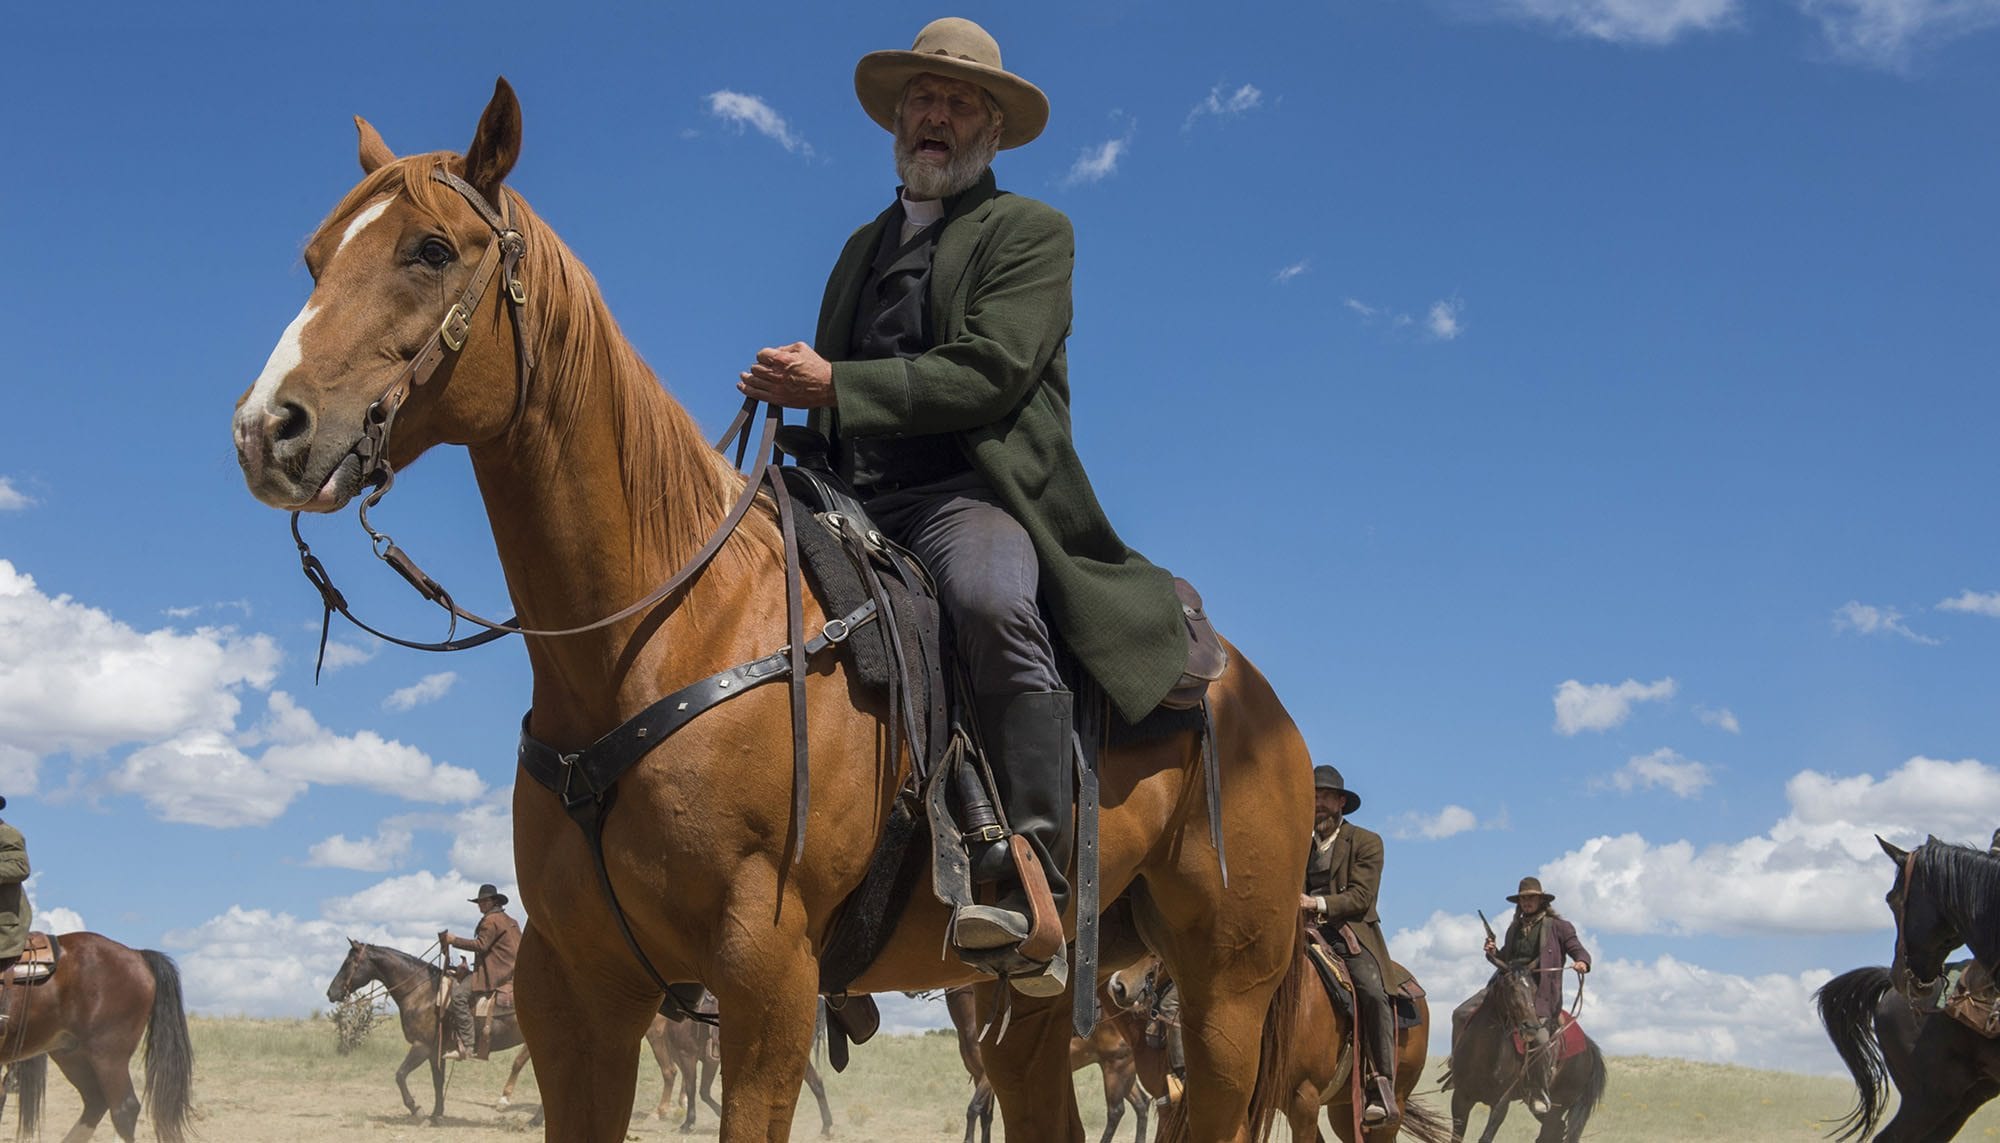 Jeff Daniels plays a classic villain in Netflix’s Western romp 'Godless'. But is it a bingeworthy series or is it all a bit forgettable?